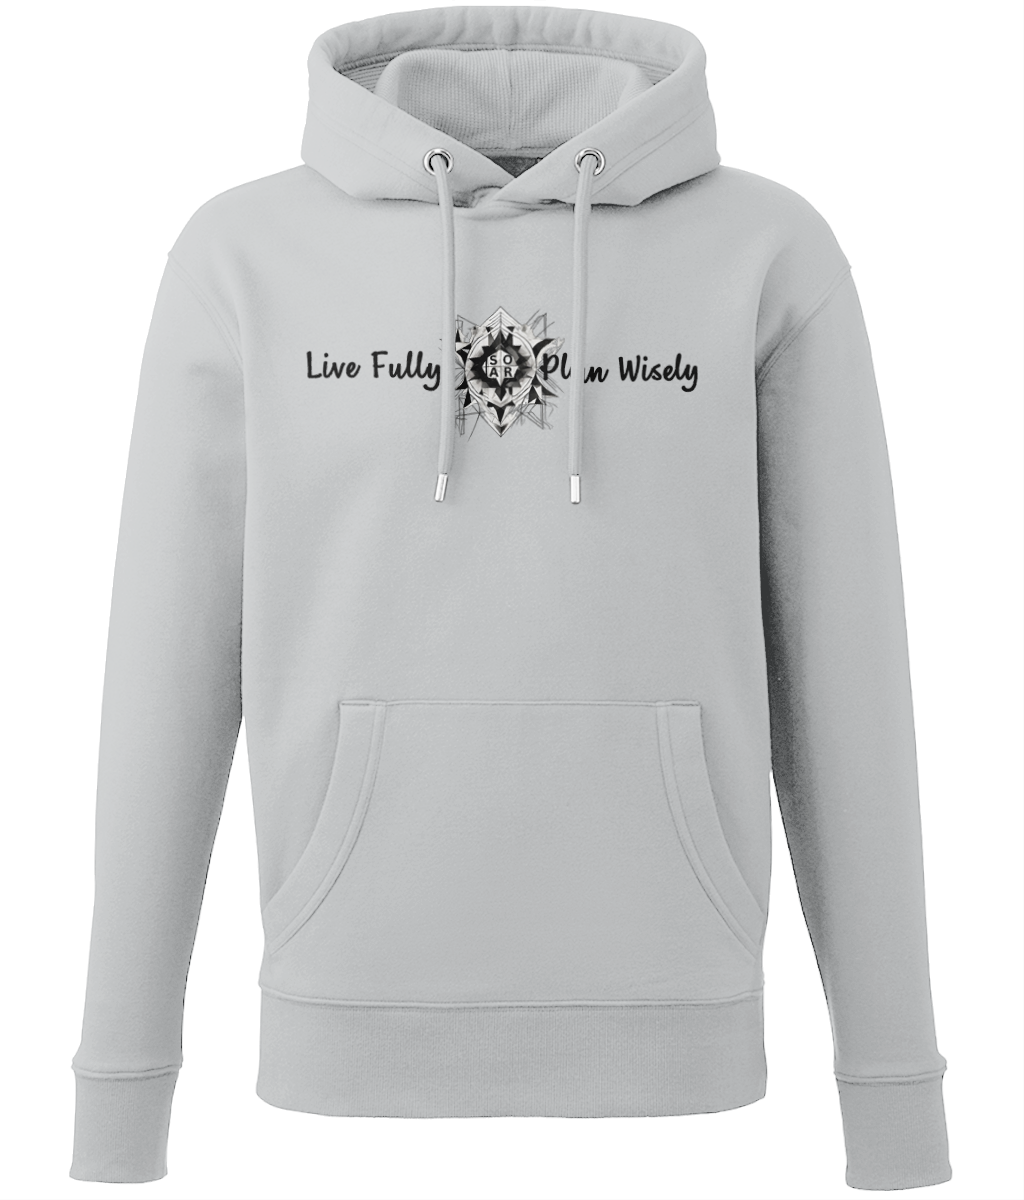 Eco-Friendly Unisex Hoodie - Live Fully, Plan Wisely